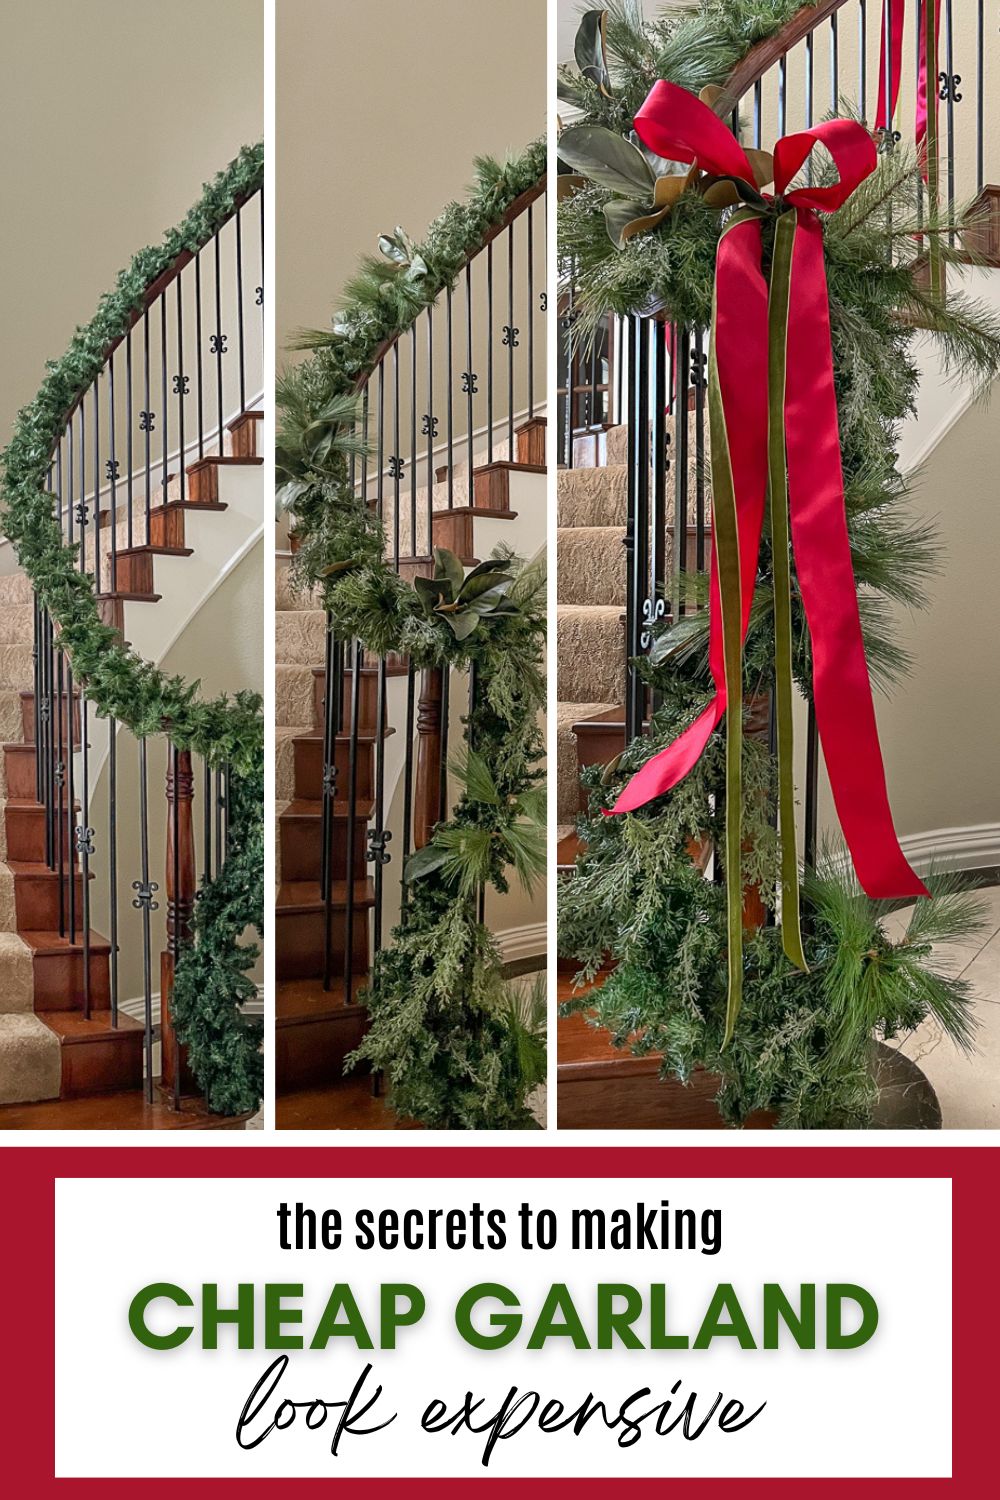 How to Make Cheap Garlands Look Lush and Expensive